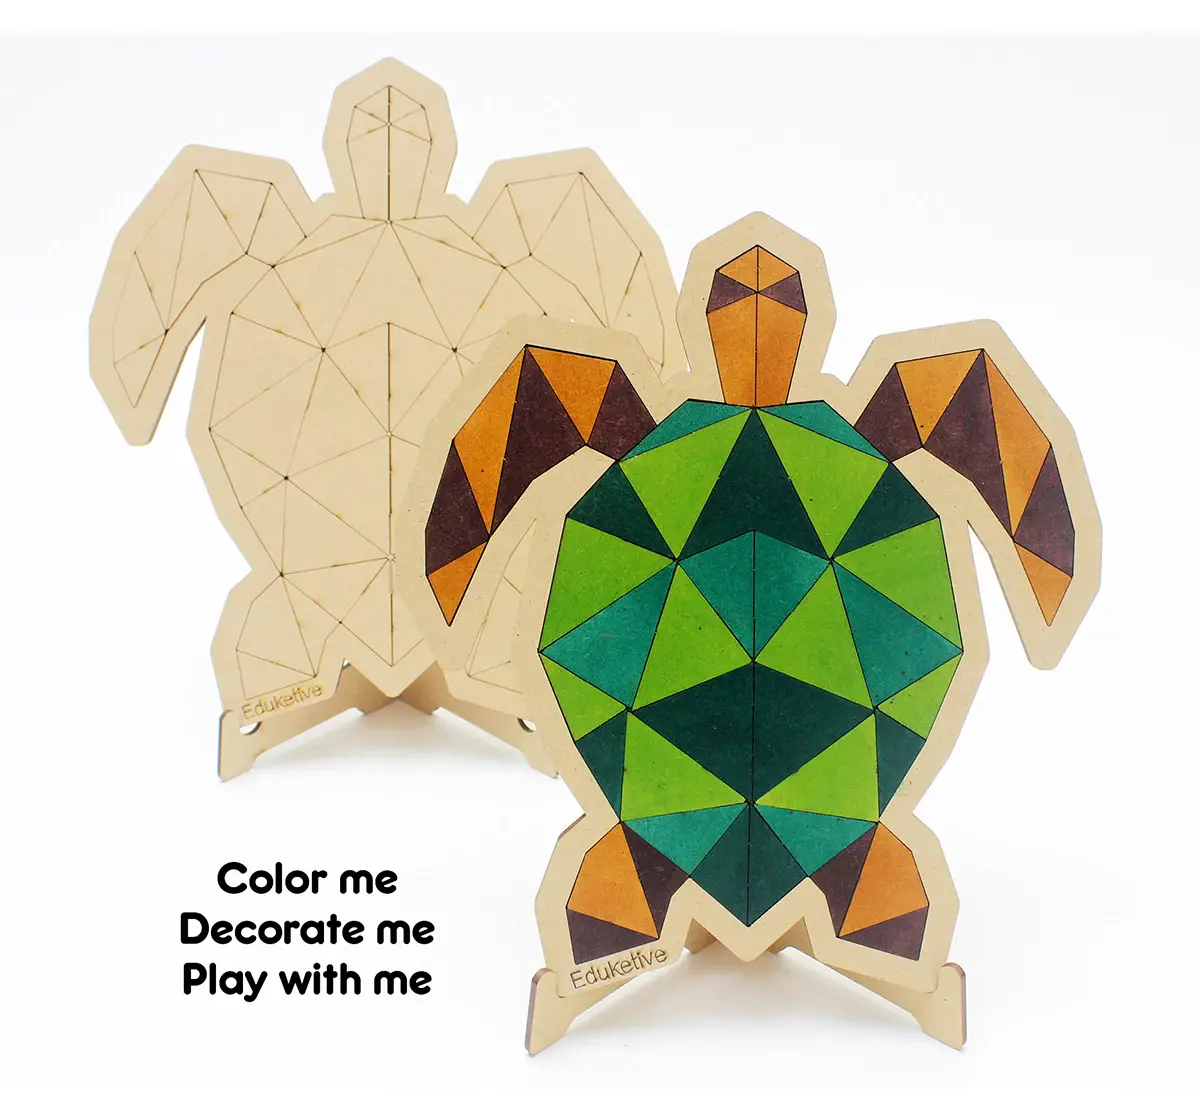 Eduketive PuzzleDecor Turtle Decorative Coloring Puzzle with Stand 51 Pieces Kids Age 3-12 Years Old + Free Colors